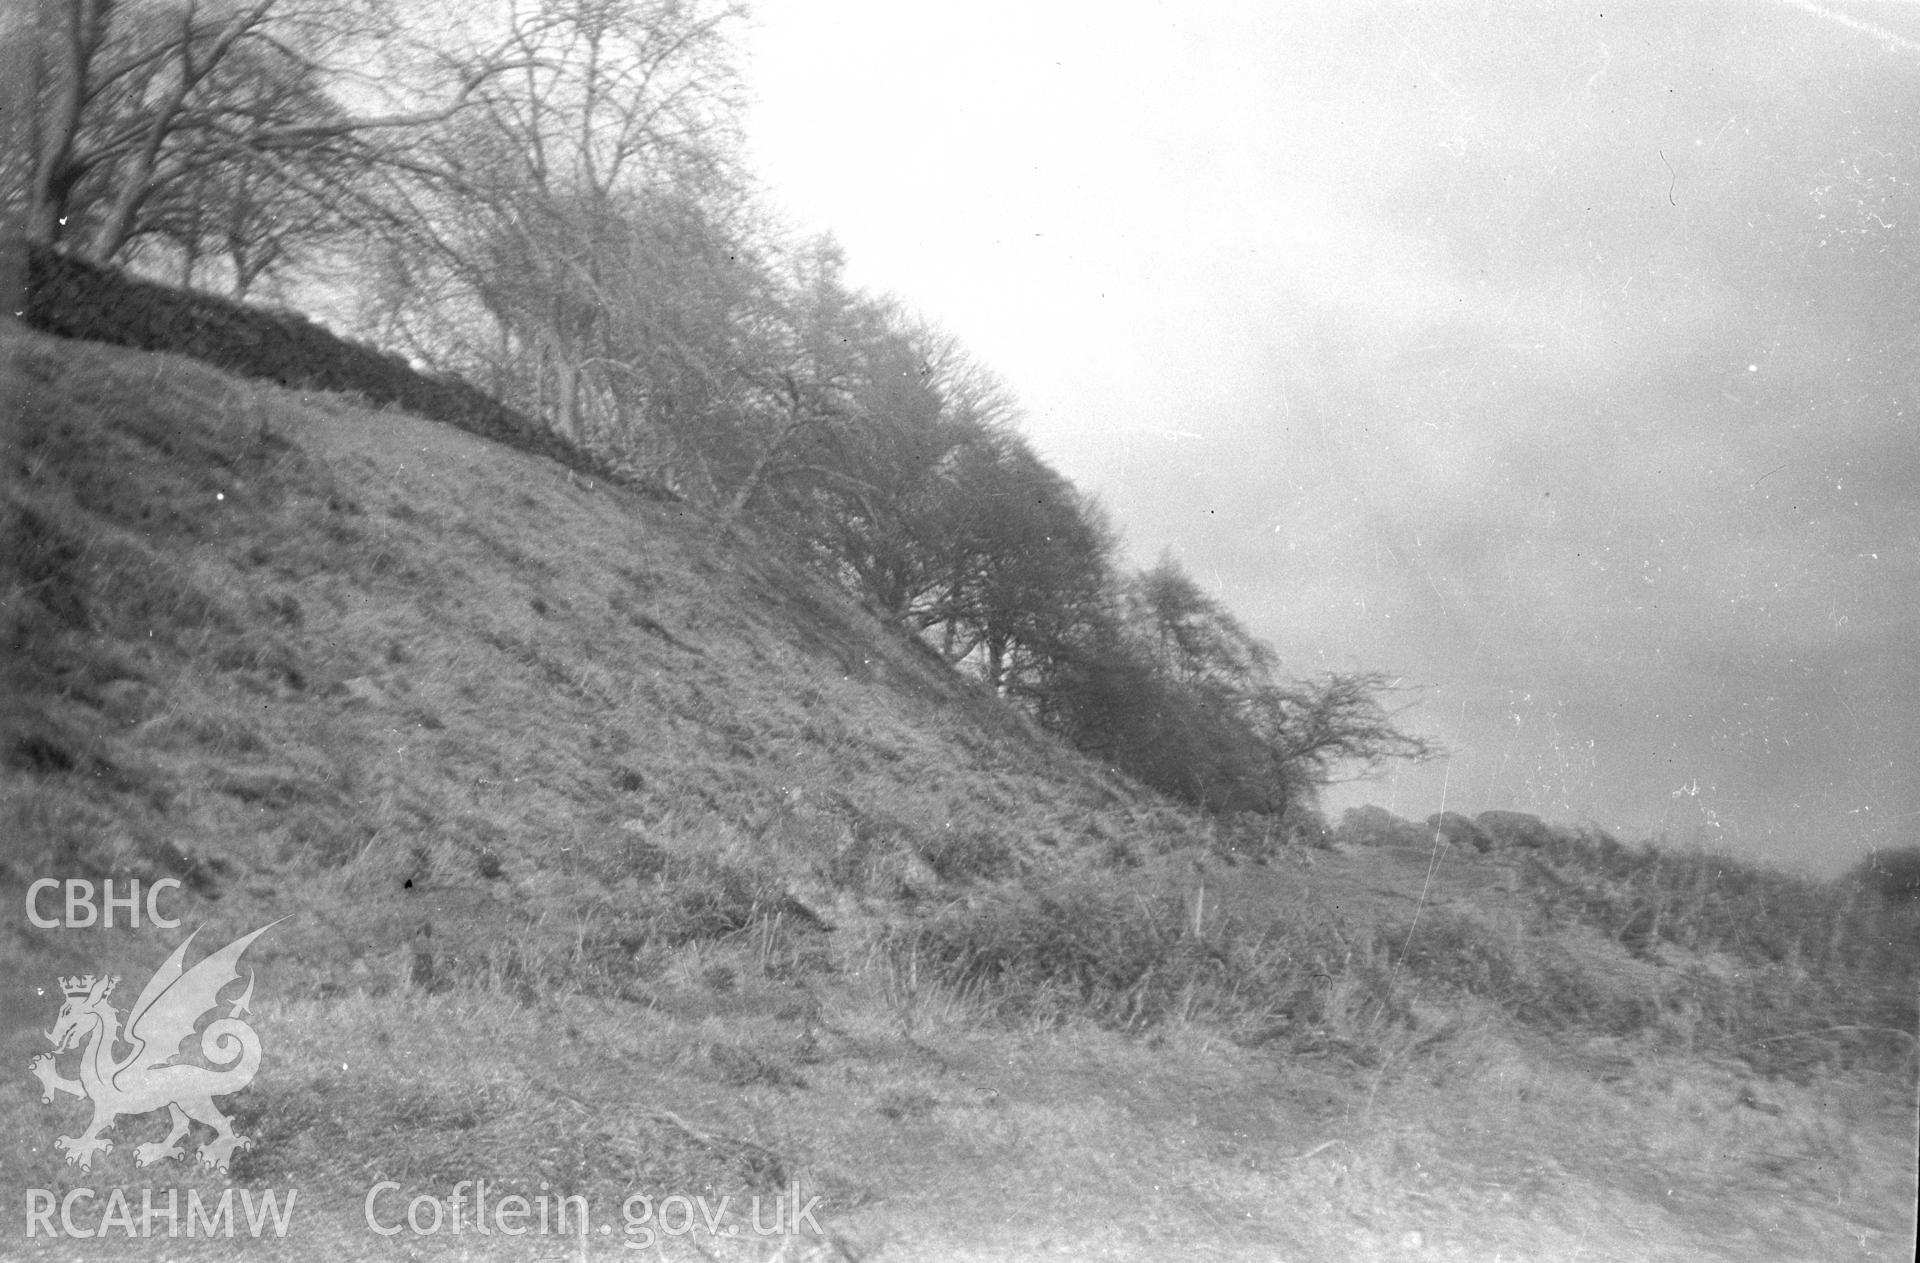 Digital copy of a nitrate negative showing Breidden Hill camp. From the Cadw Monuments in Care Collection.